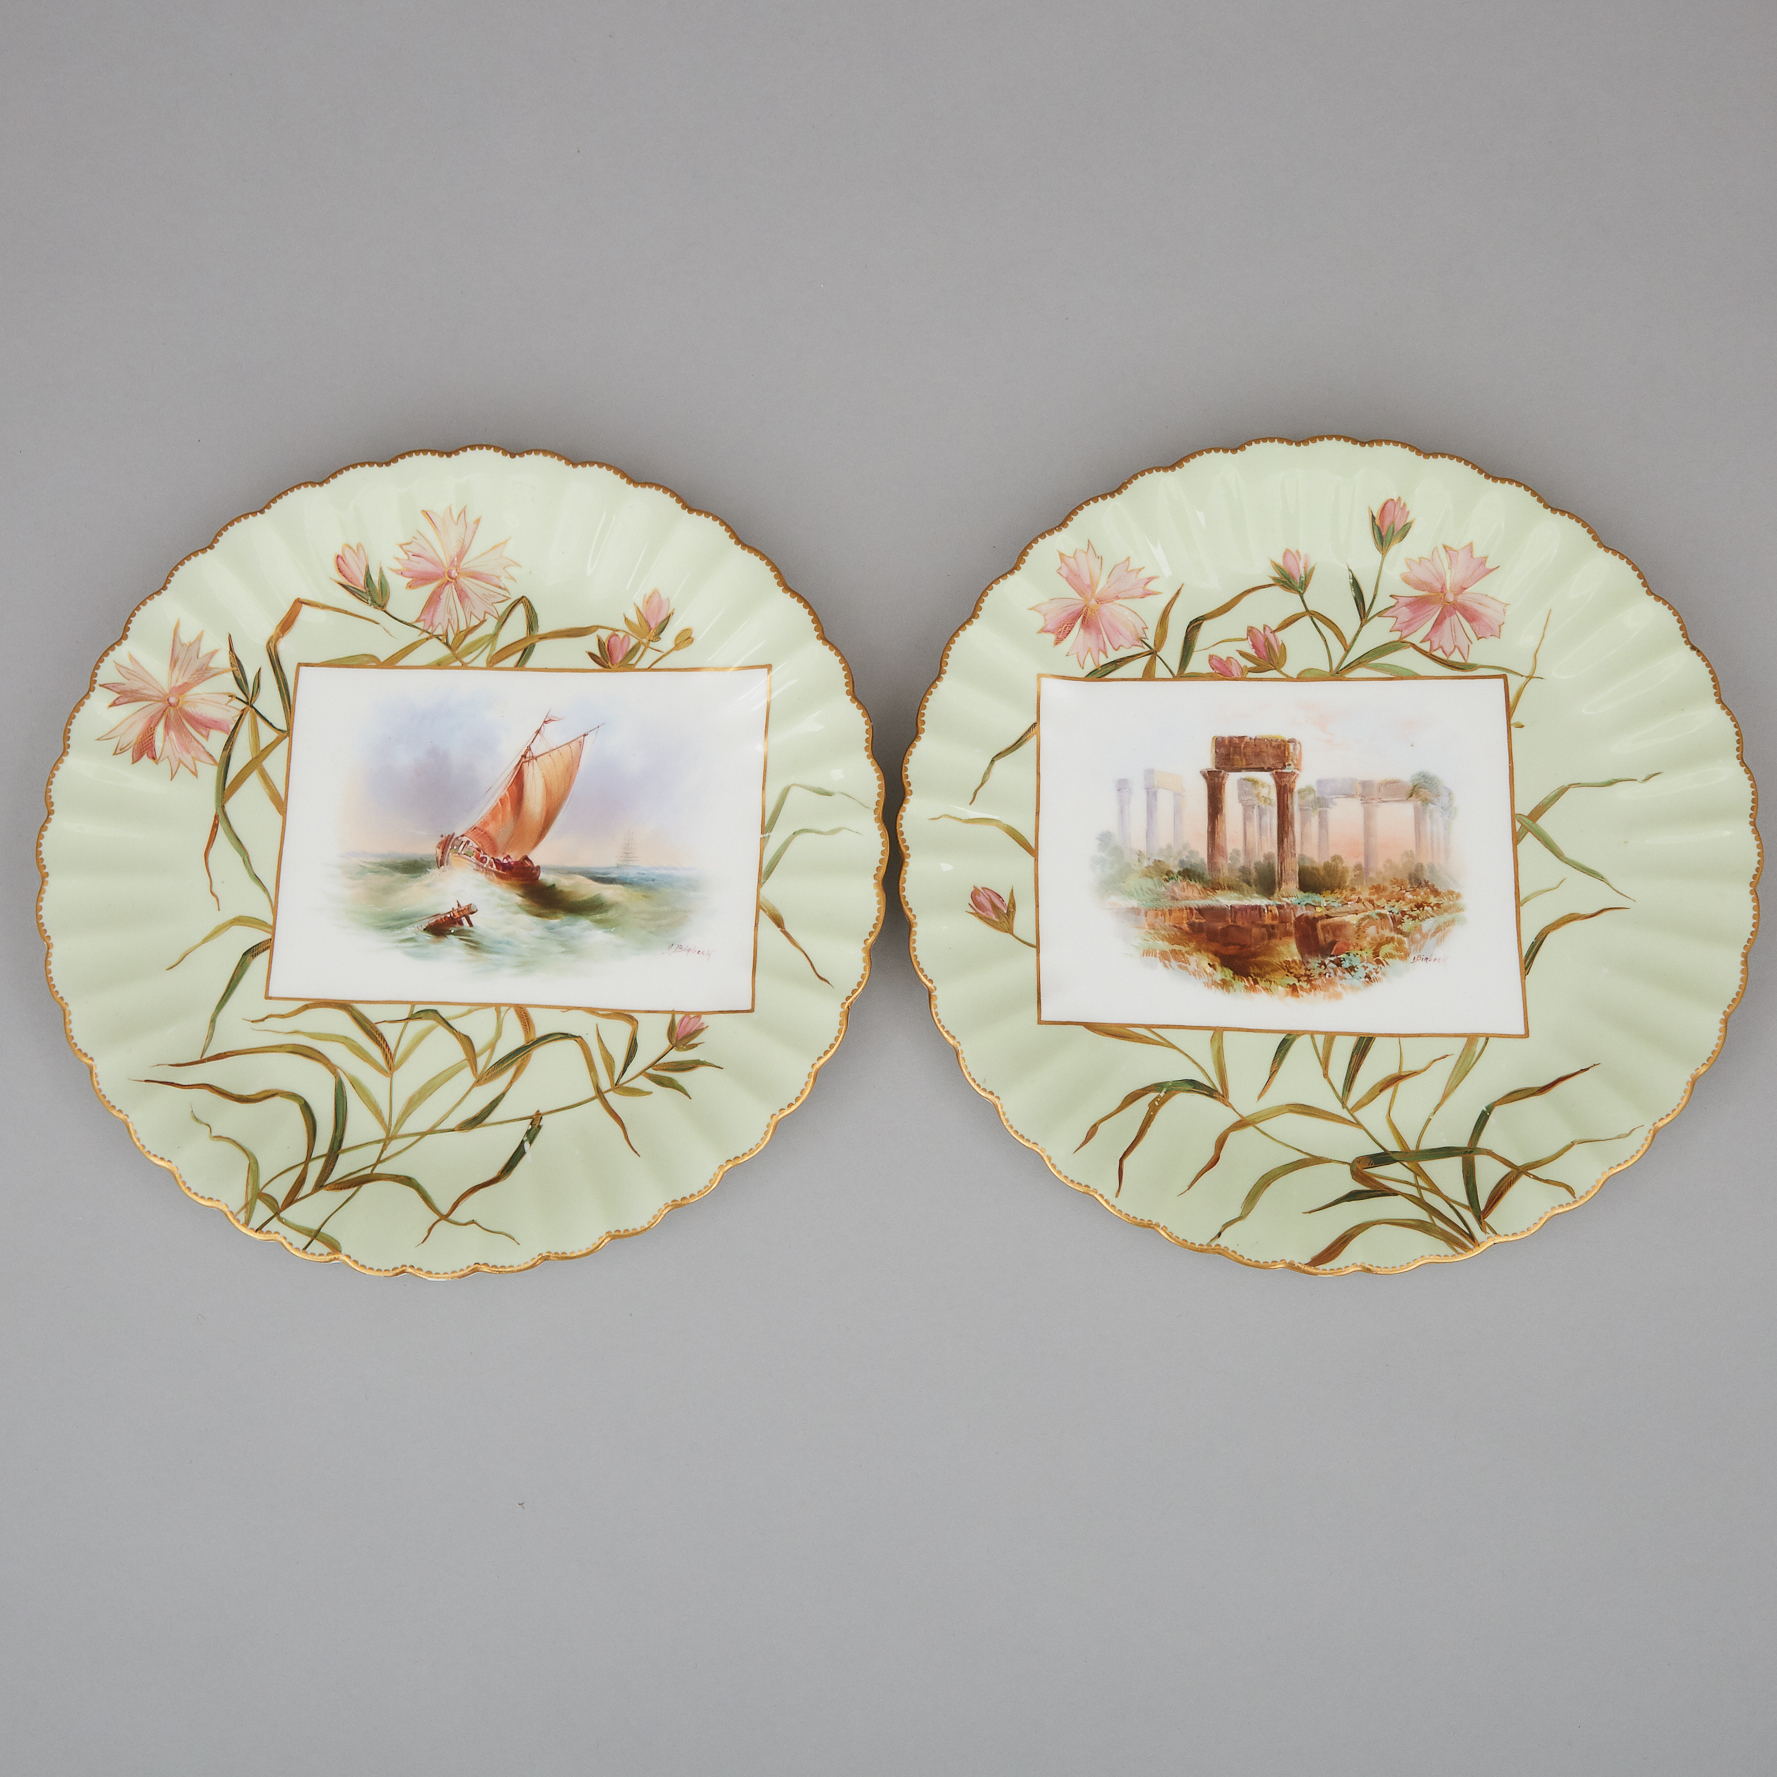 Pair of Bodley Scenic Plates, J. Birbeck, late 19th century